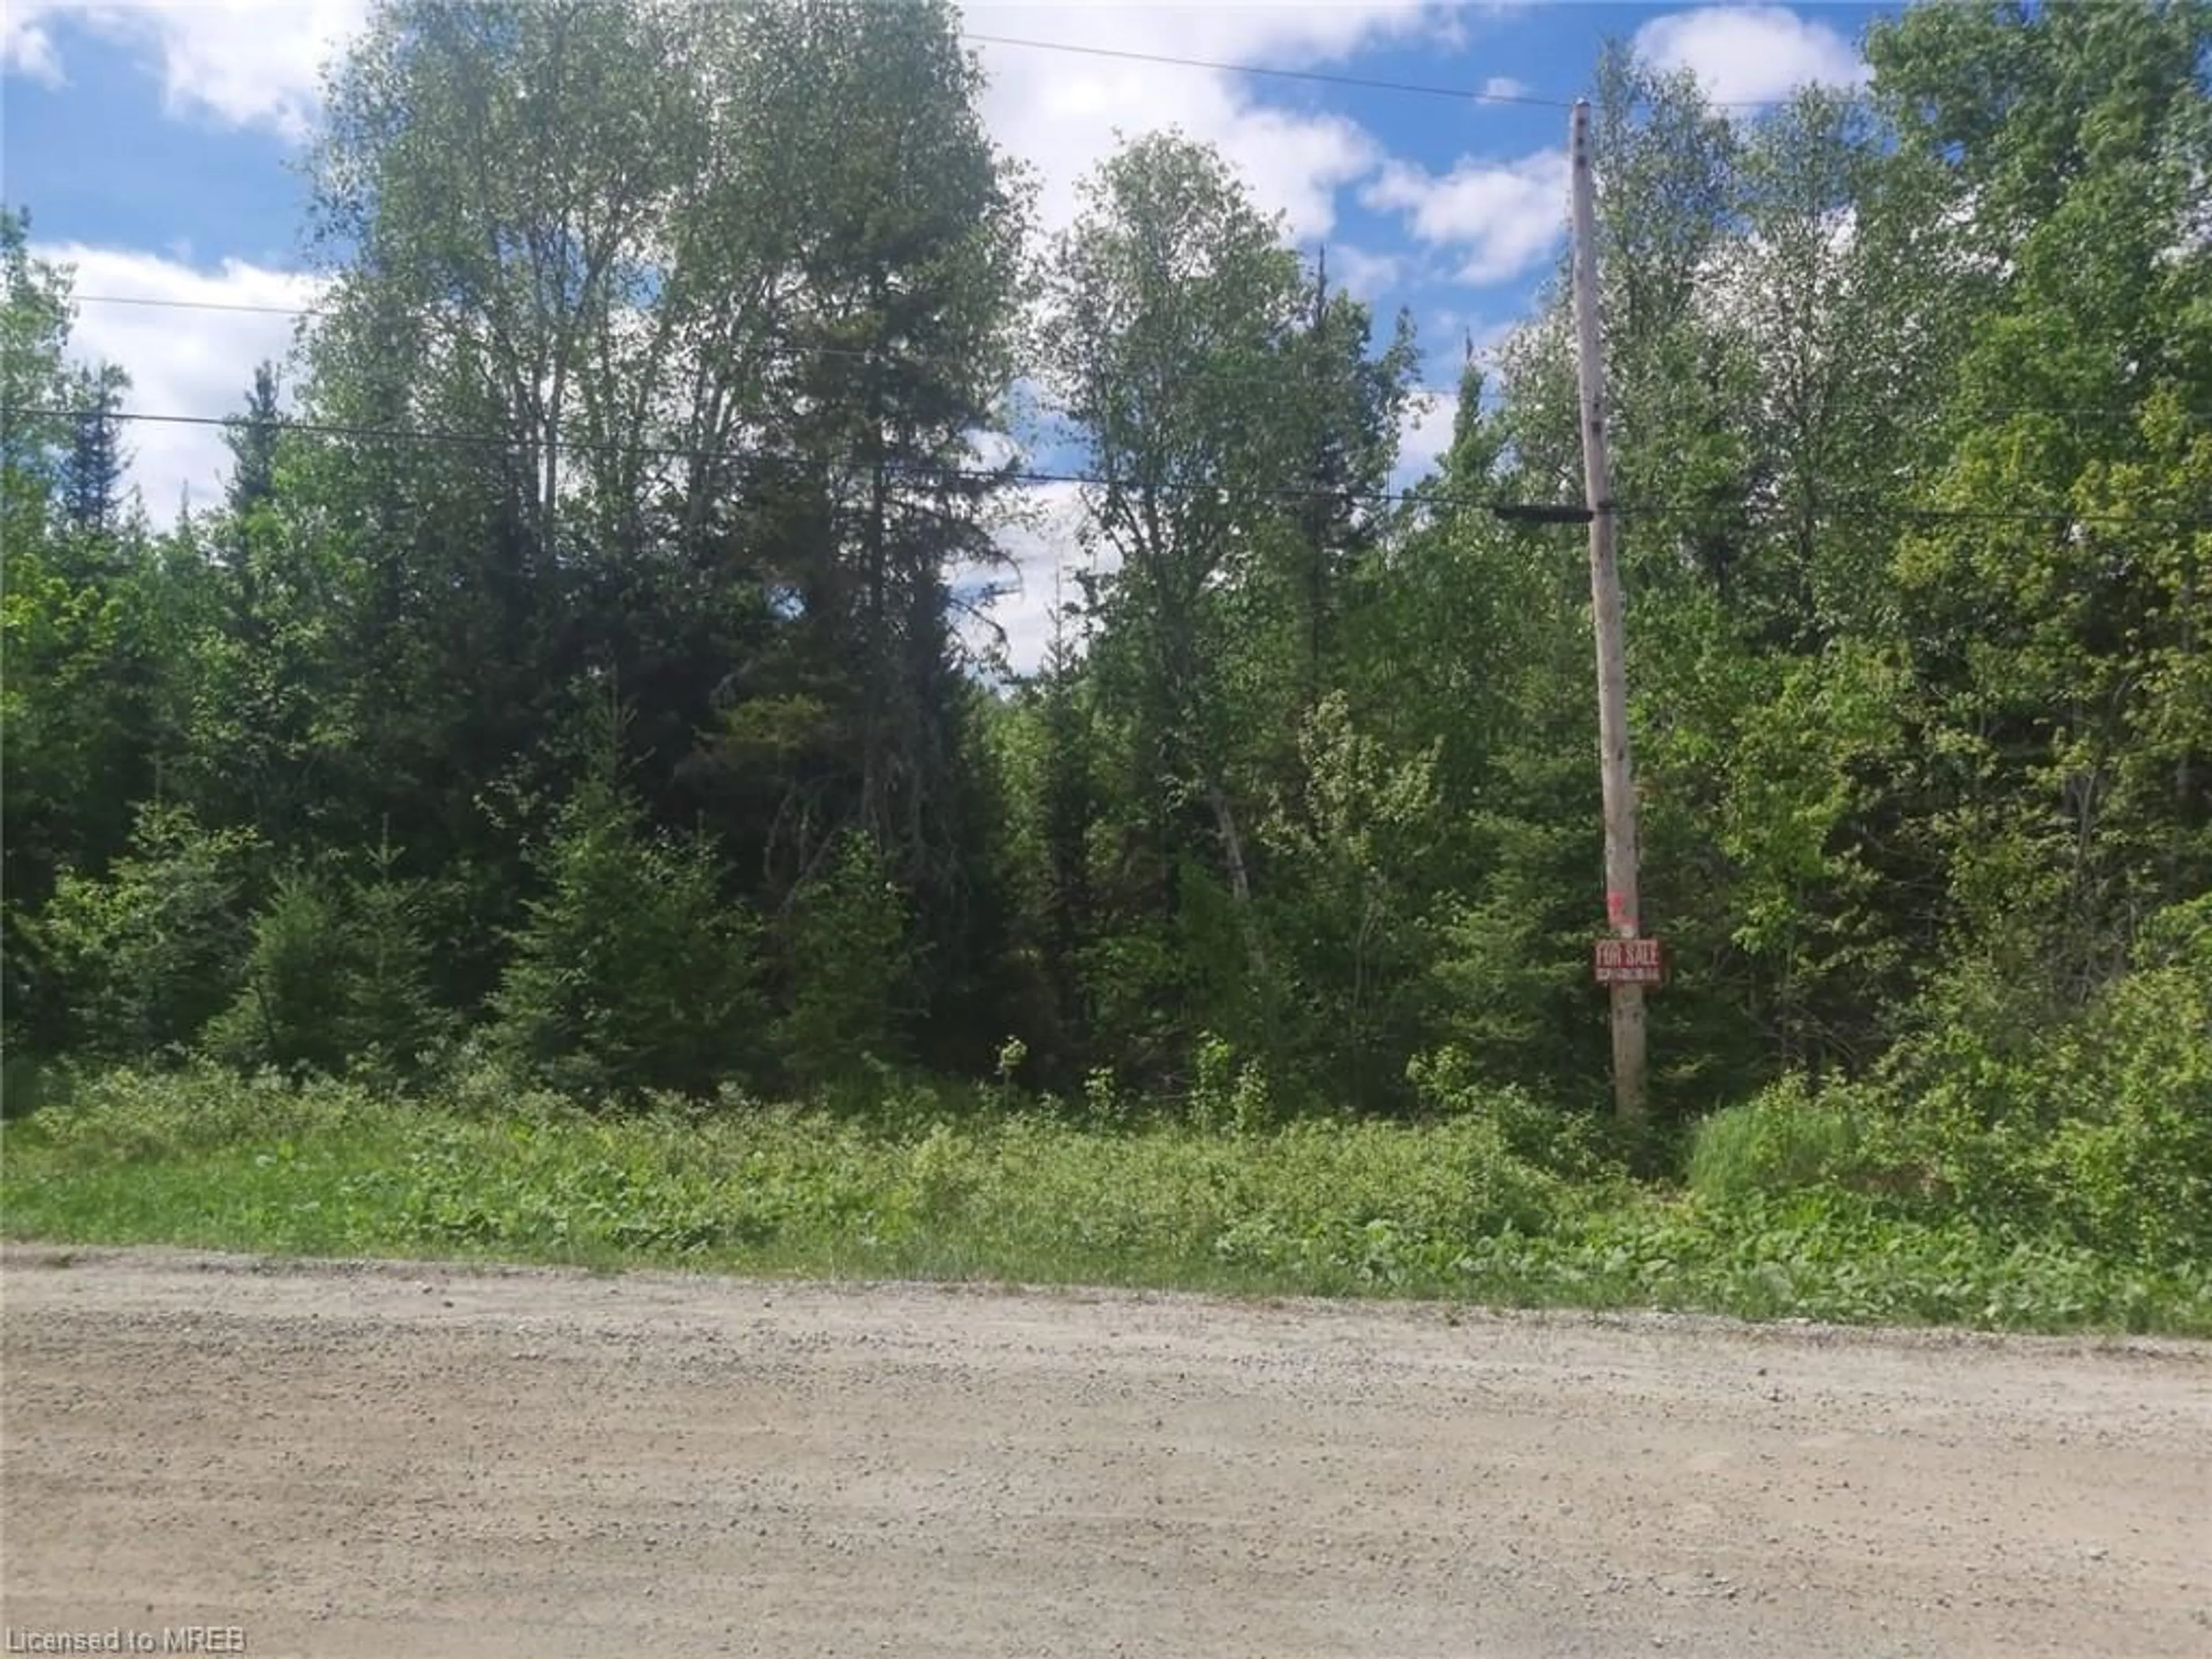 Forest view for N/A Nepewassi Lake Rd, Markstay-Warren Ontario P0M 2G0